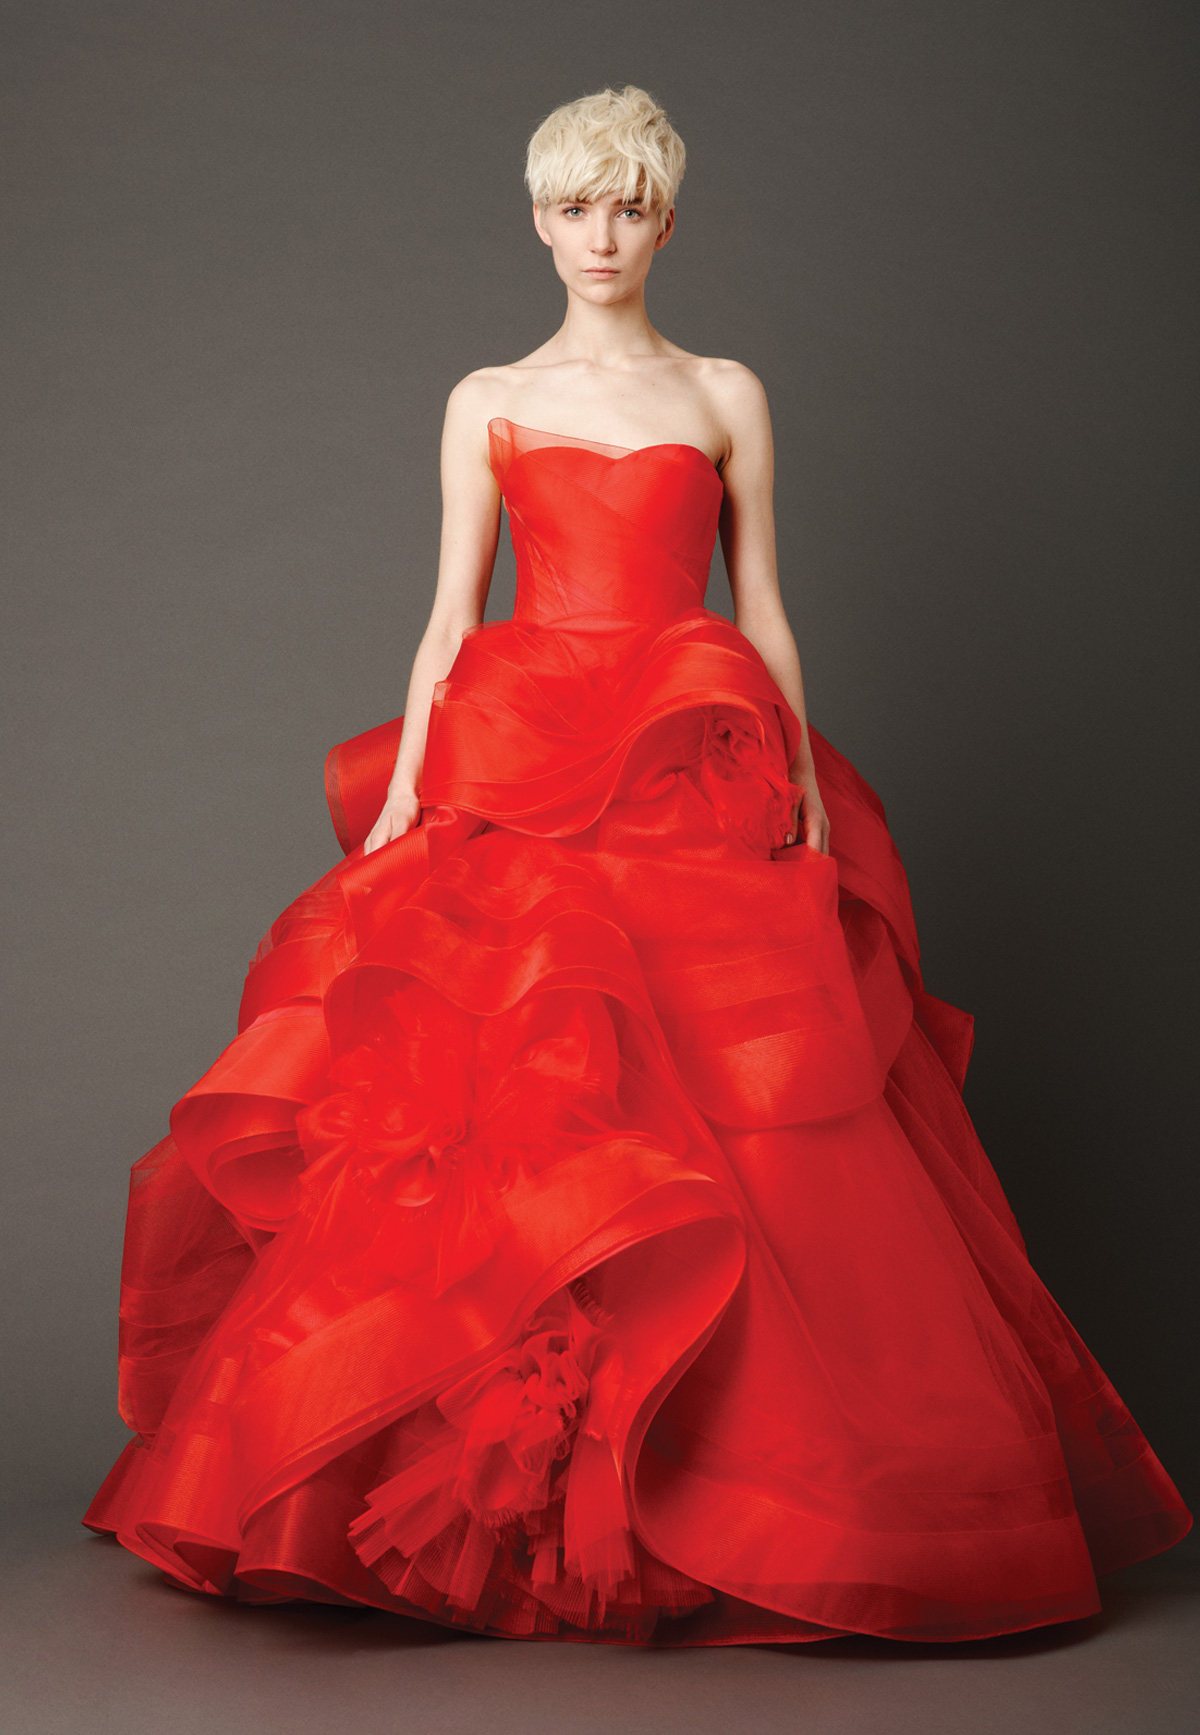 Great Red Wedding Dresses  The ultimate guide 